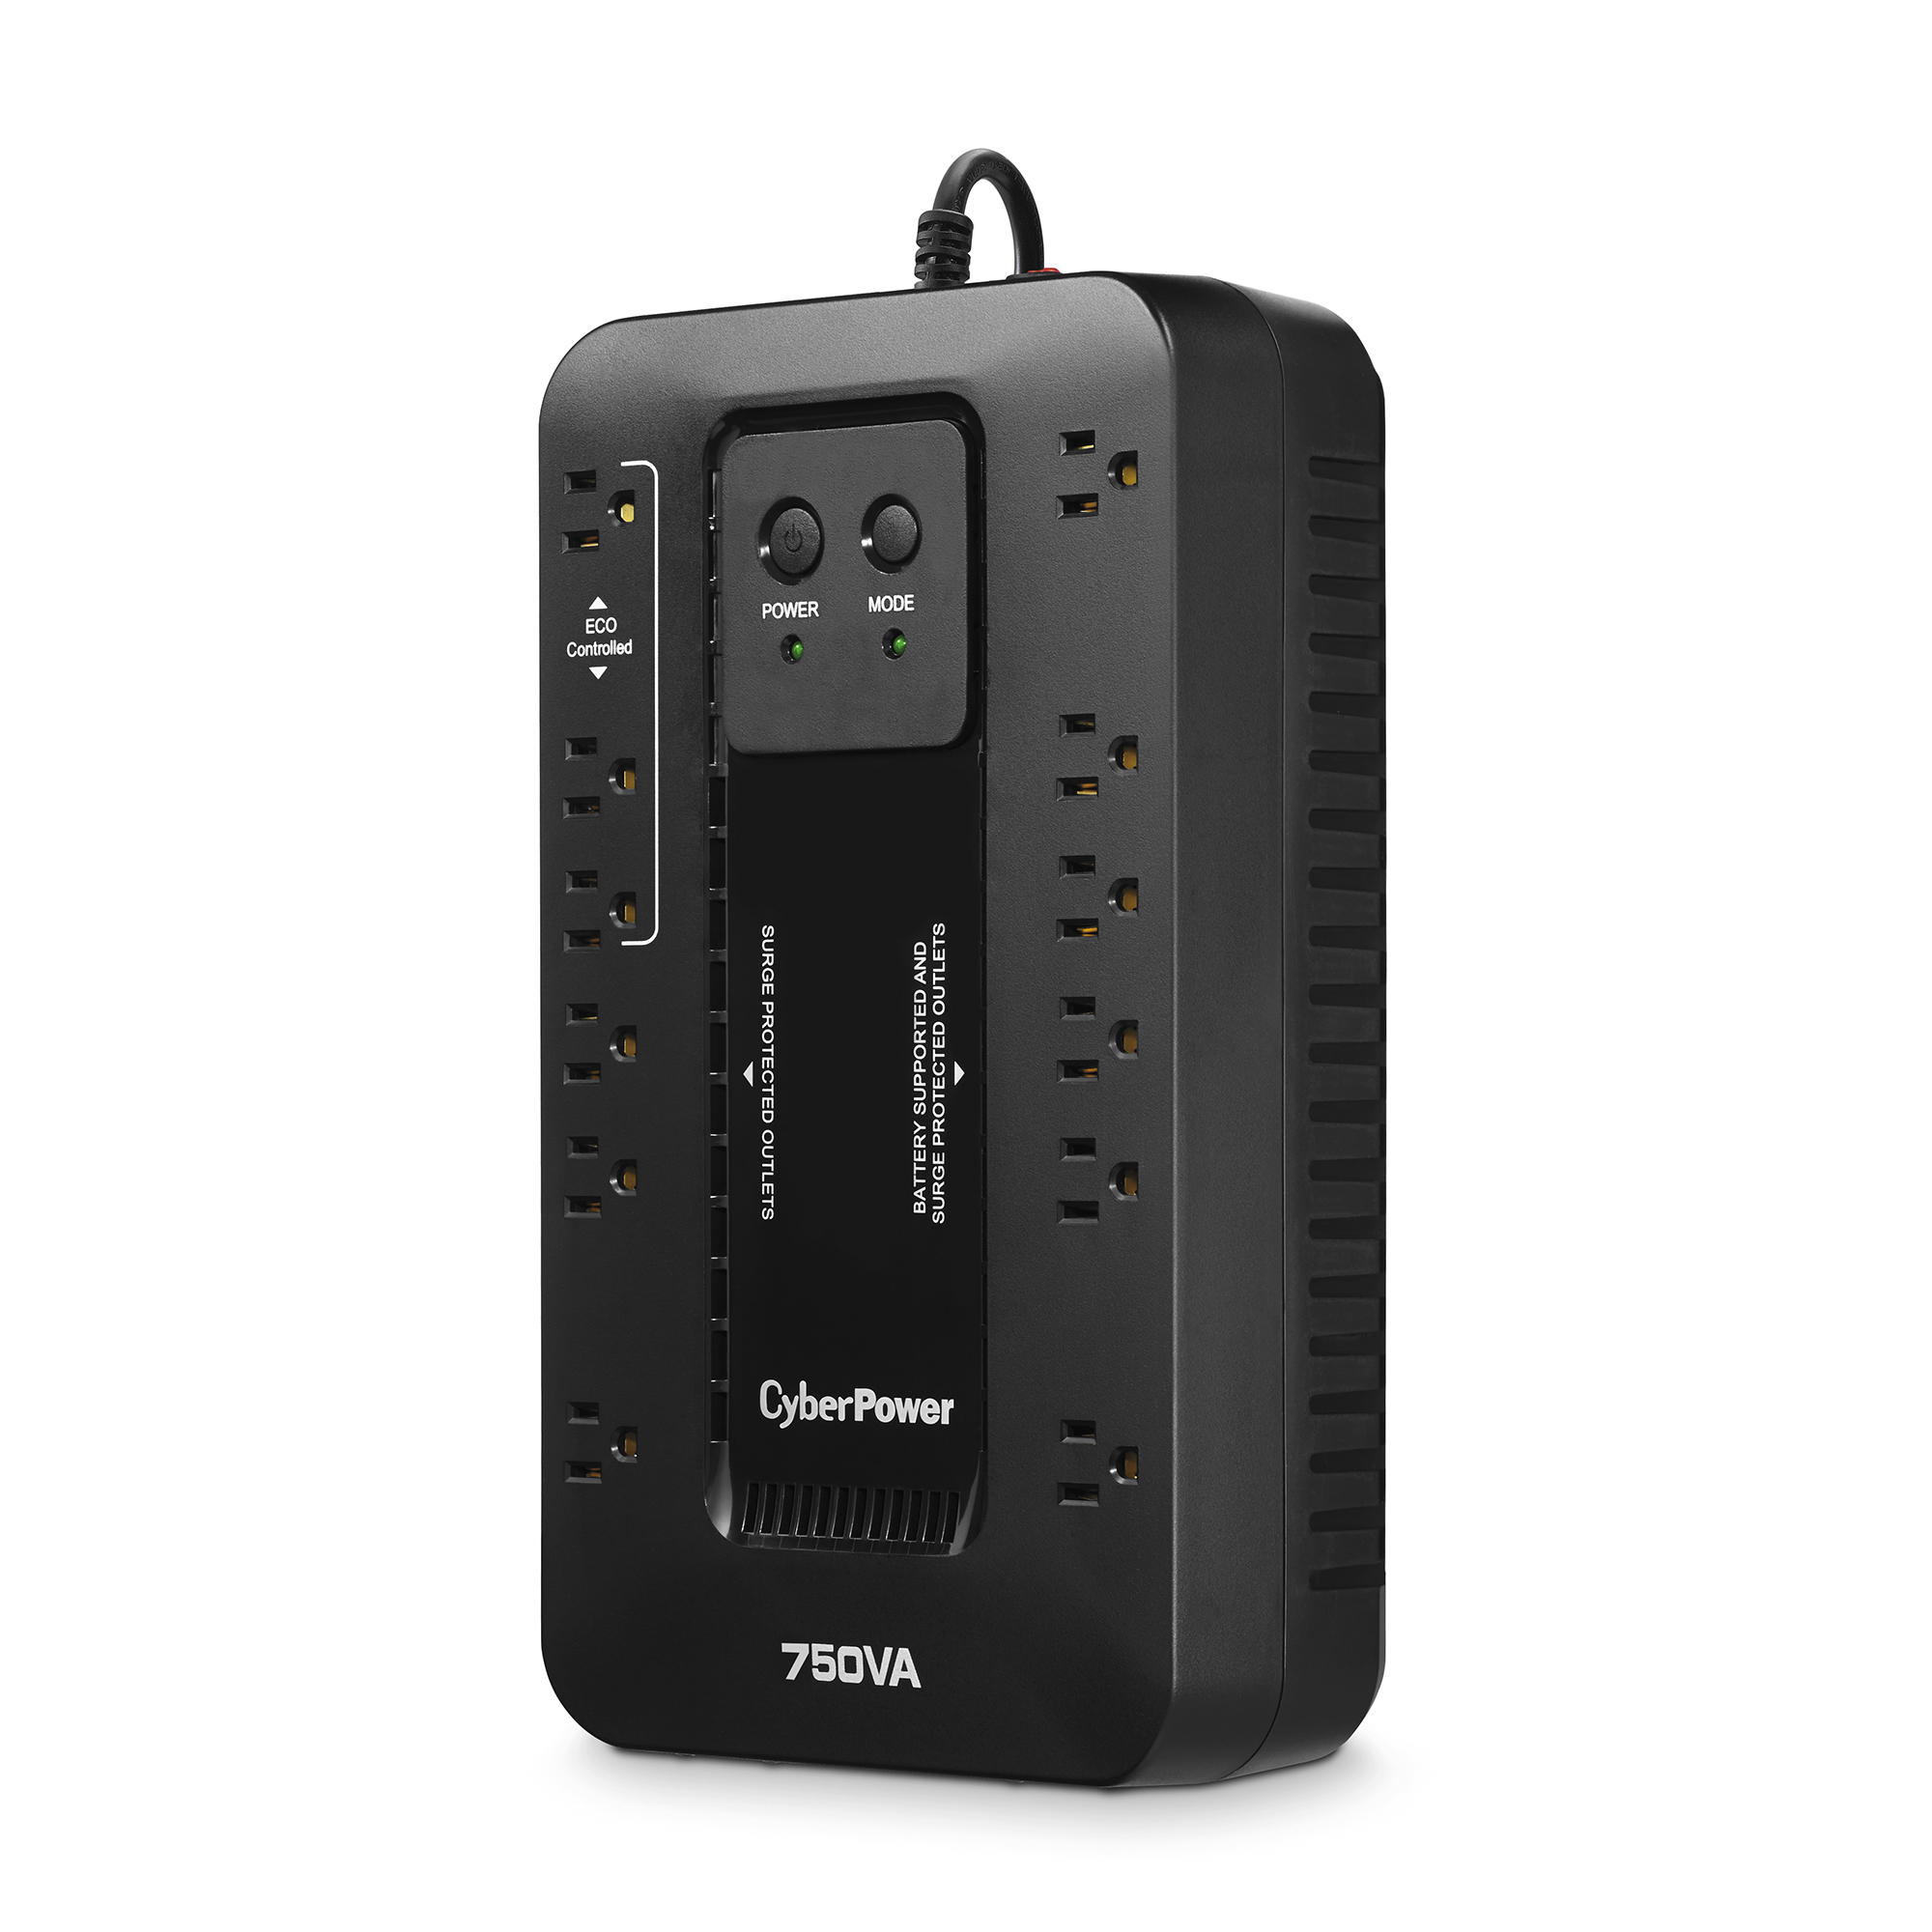 EC750G Ecologic UPS Series Product Details, Specs, Downloads  CyberPower